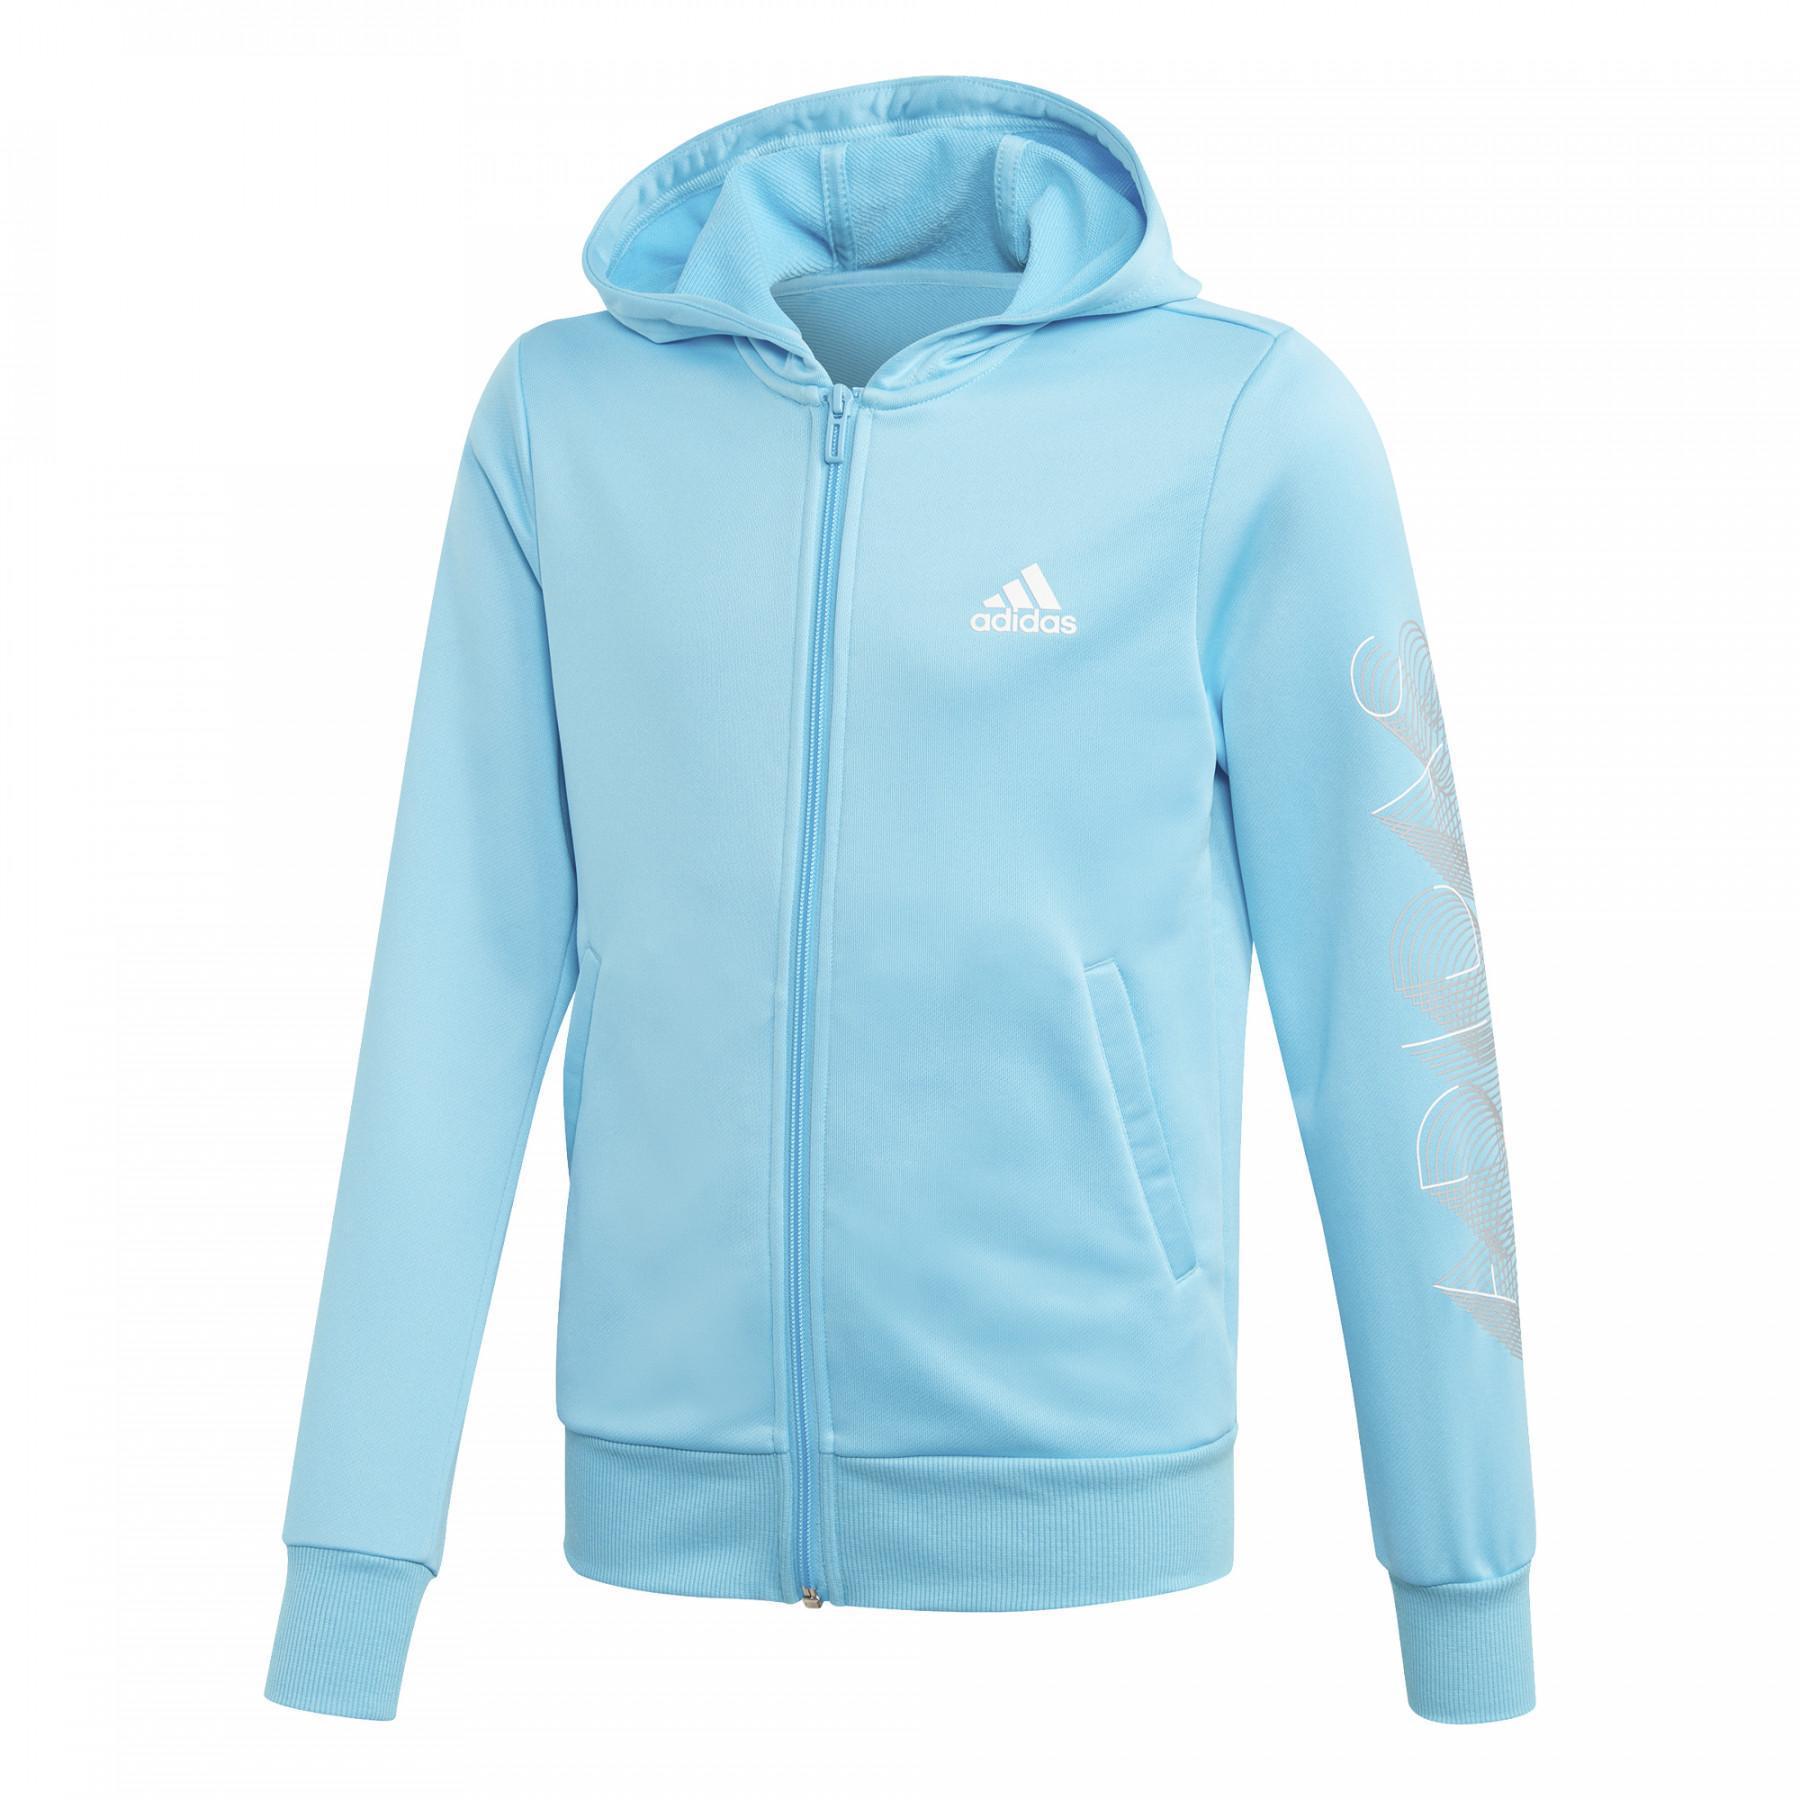 Children's tracksuit adidas Hooded Polyester